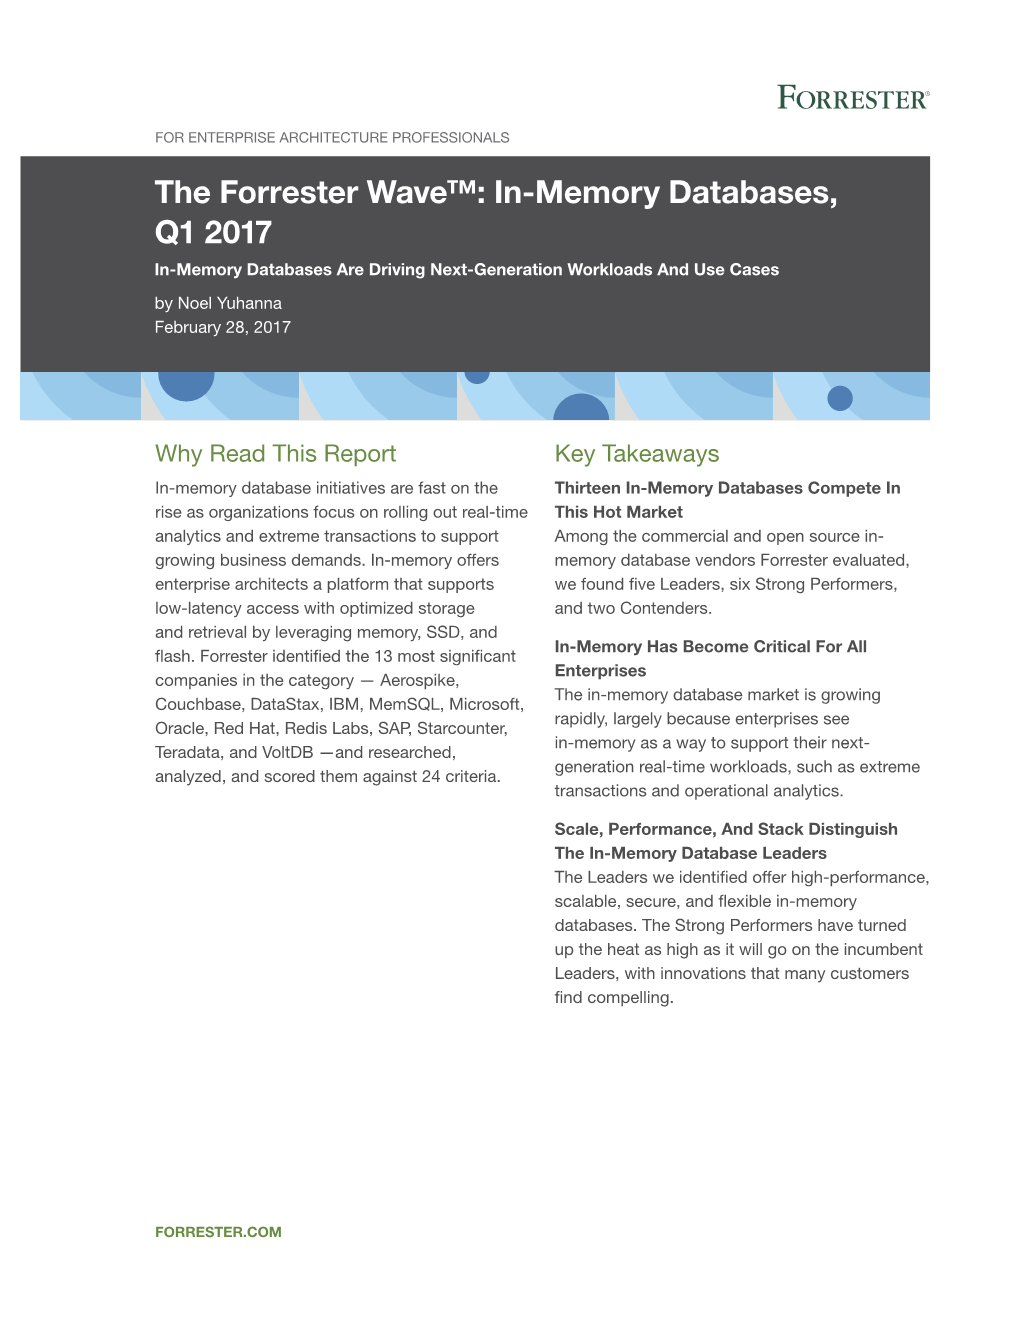 In-Memory Databases, Q1 2017 In-Memory Databases Are Driving Next-Generation Workloads and Use Cases by Noel Yuhanna February 28, 2017